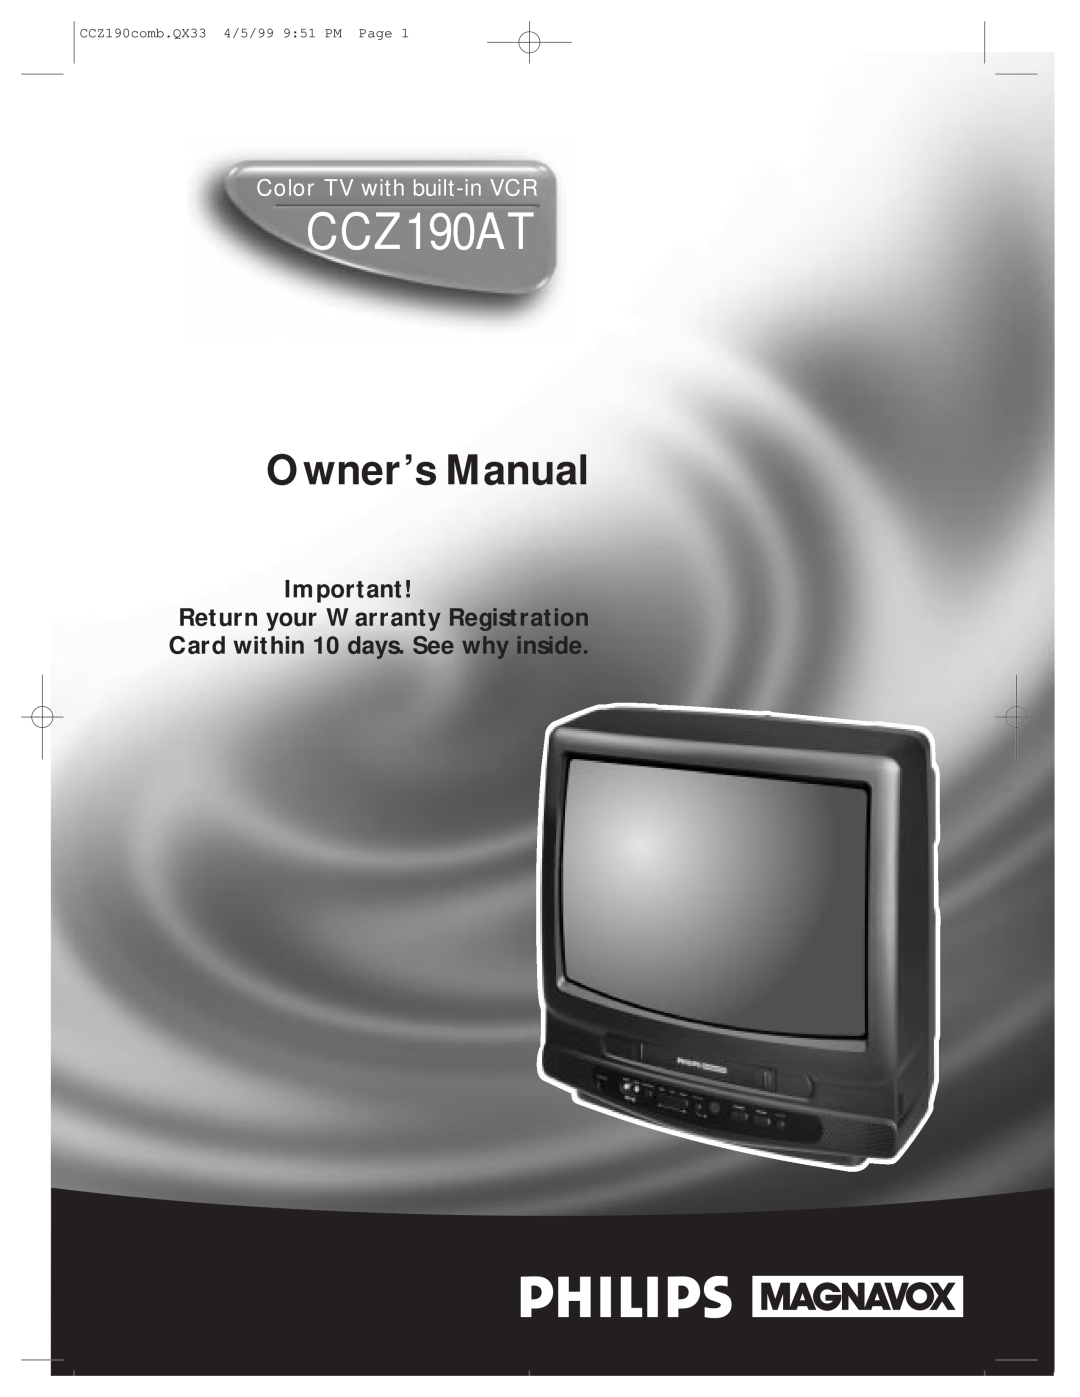 Magnavox CCZ190AT owner manual Return your Warranty Registration Card within 10 days. See why inside, Owner’s Manual 